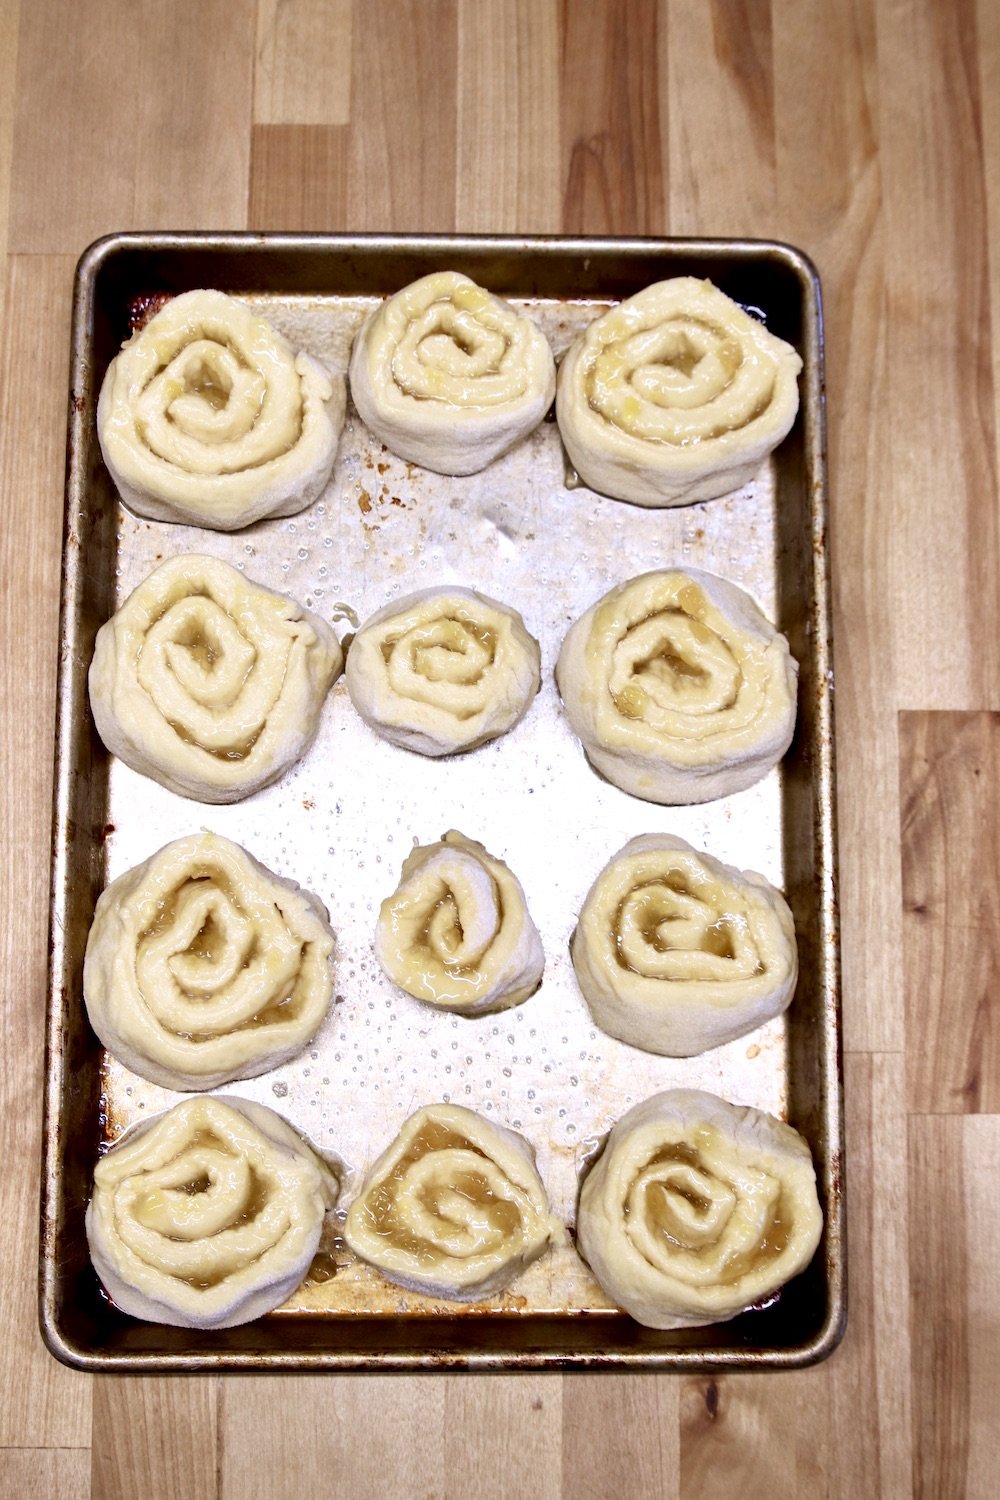 Sweet rolls on a sheet pan ready to rise